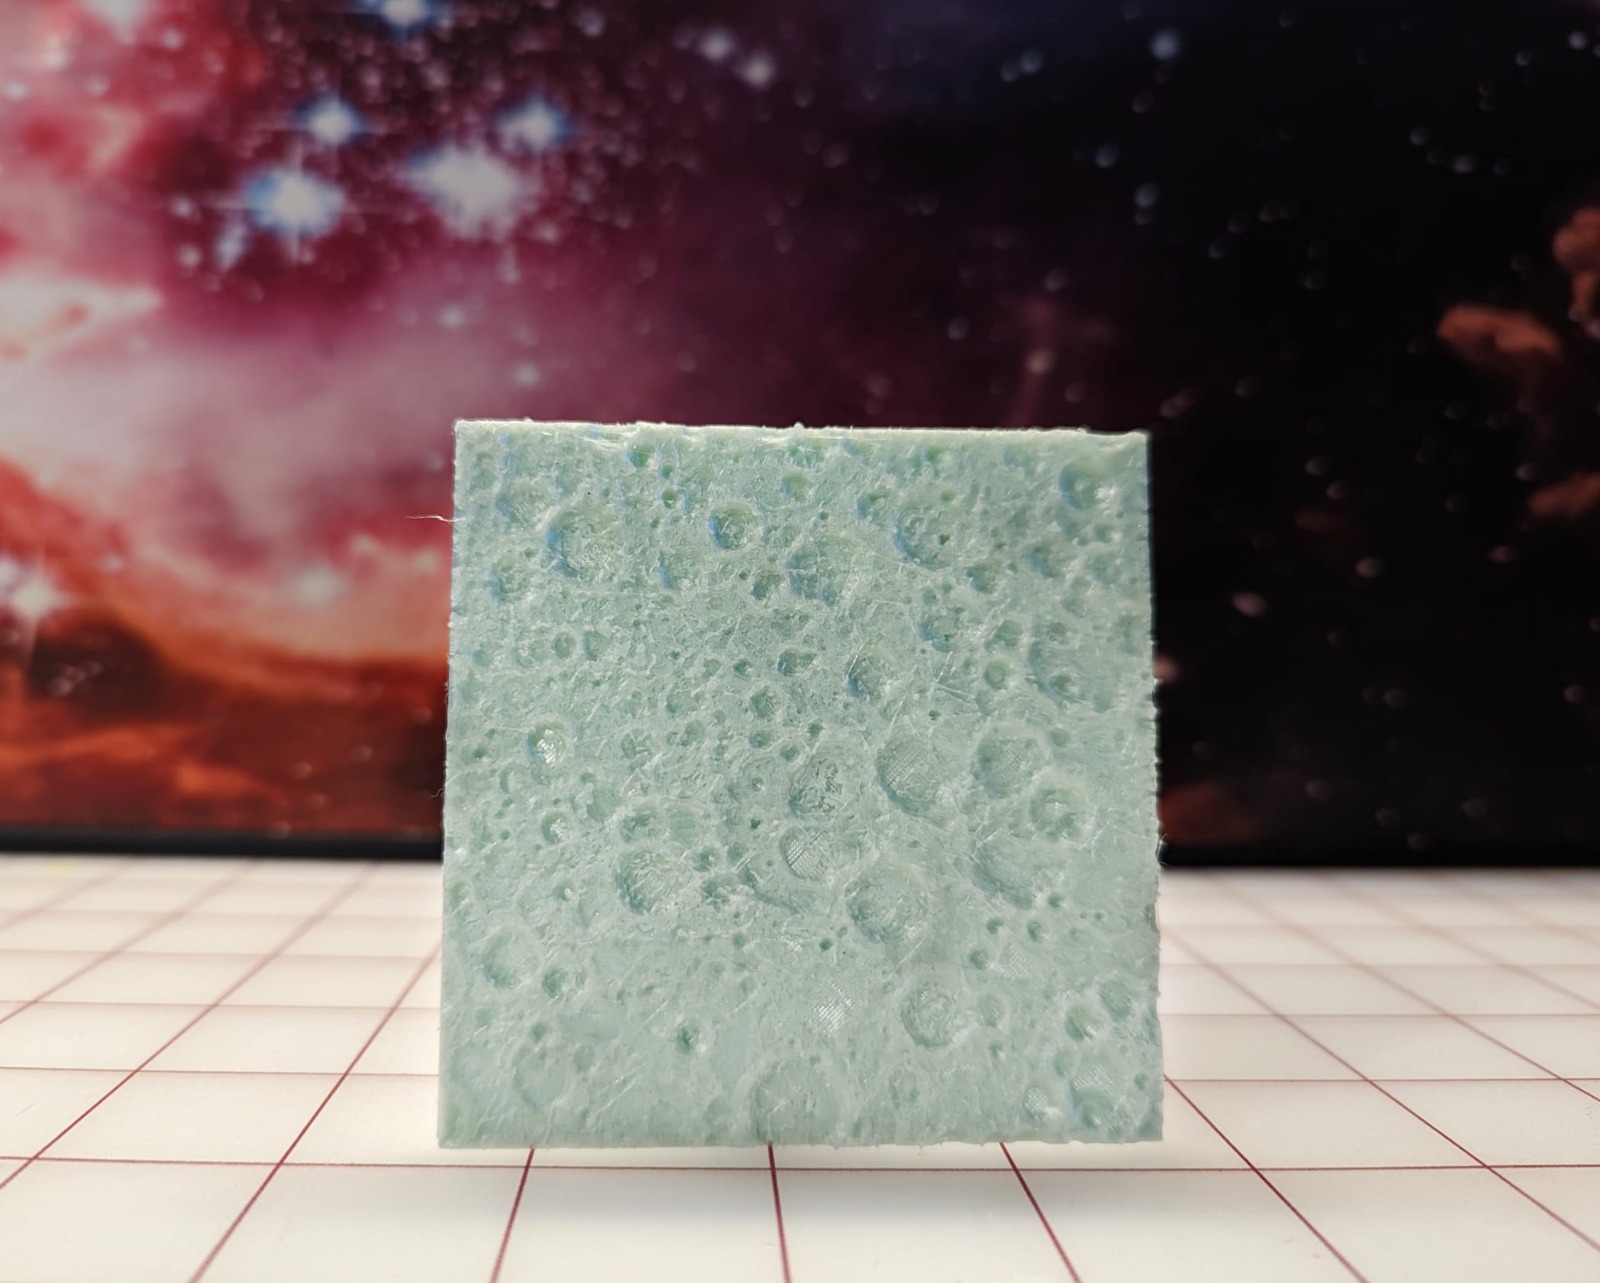 A 3D printed topographical map of the lunar far side.